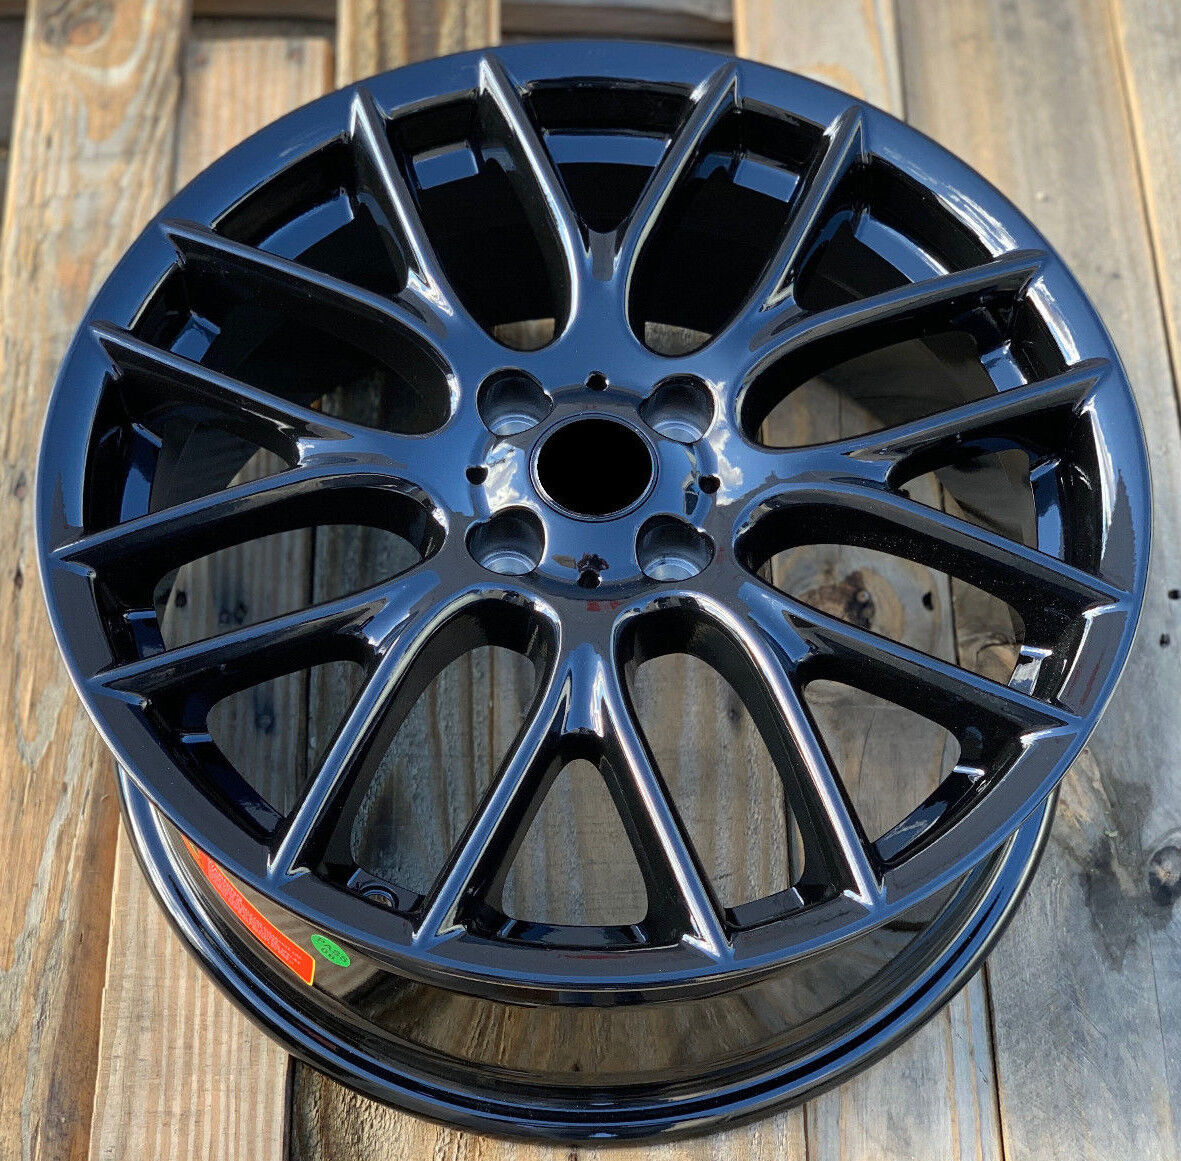 17 Inch Wheels For Mini Cooper and S Gloss Black Finish 4x100 Rims Set of 4